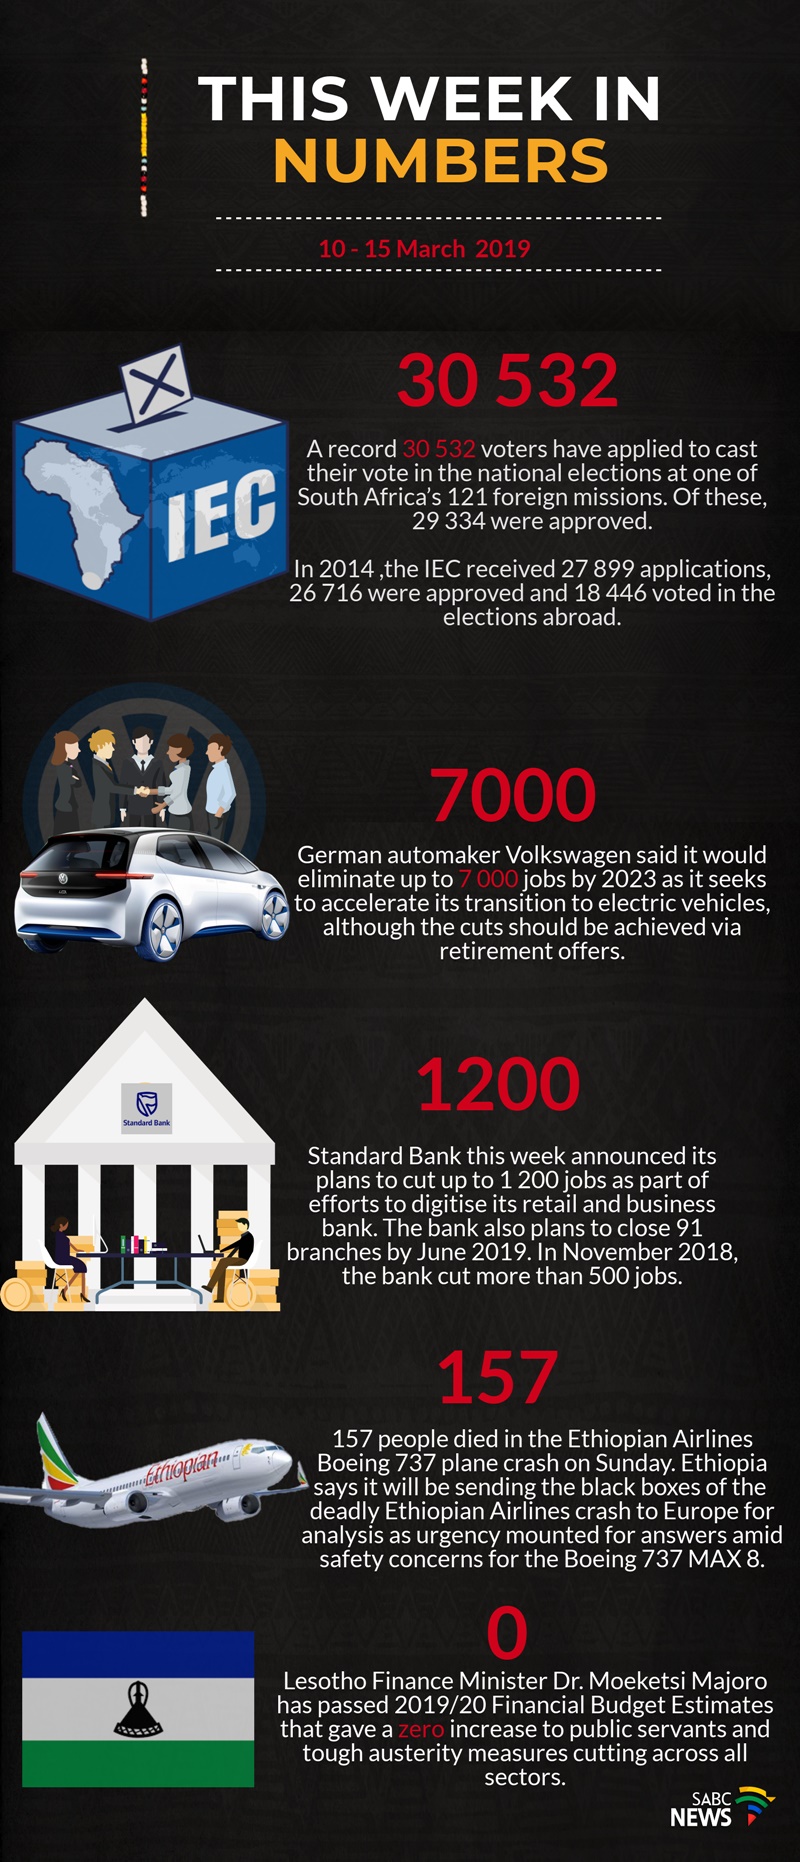 SABC_News_In_Numbers_10-15 March 2018_Graphic